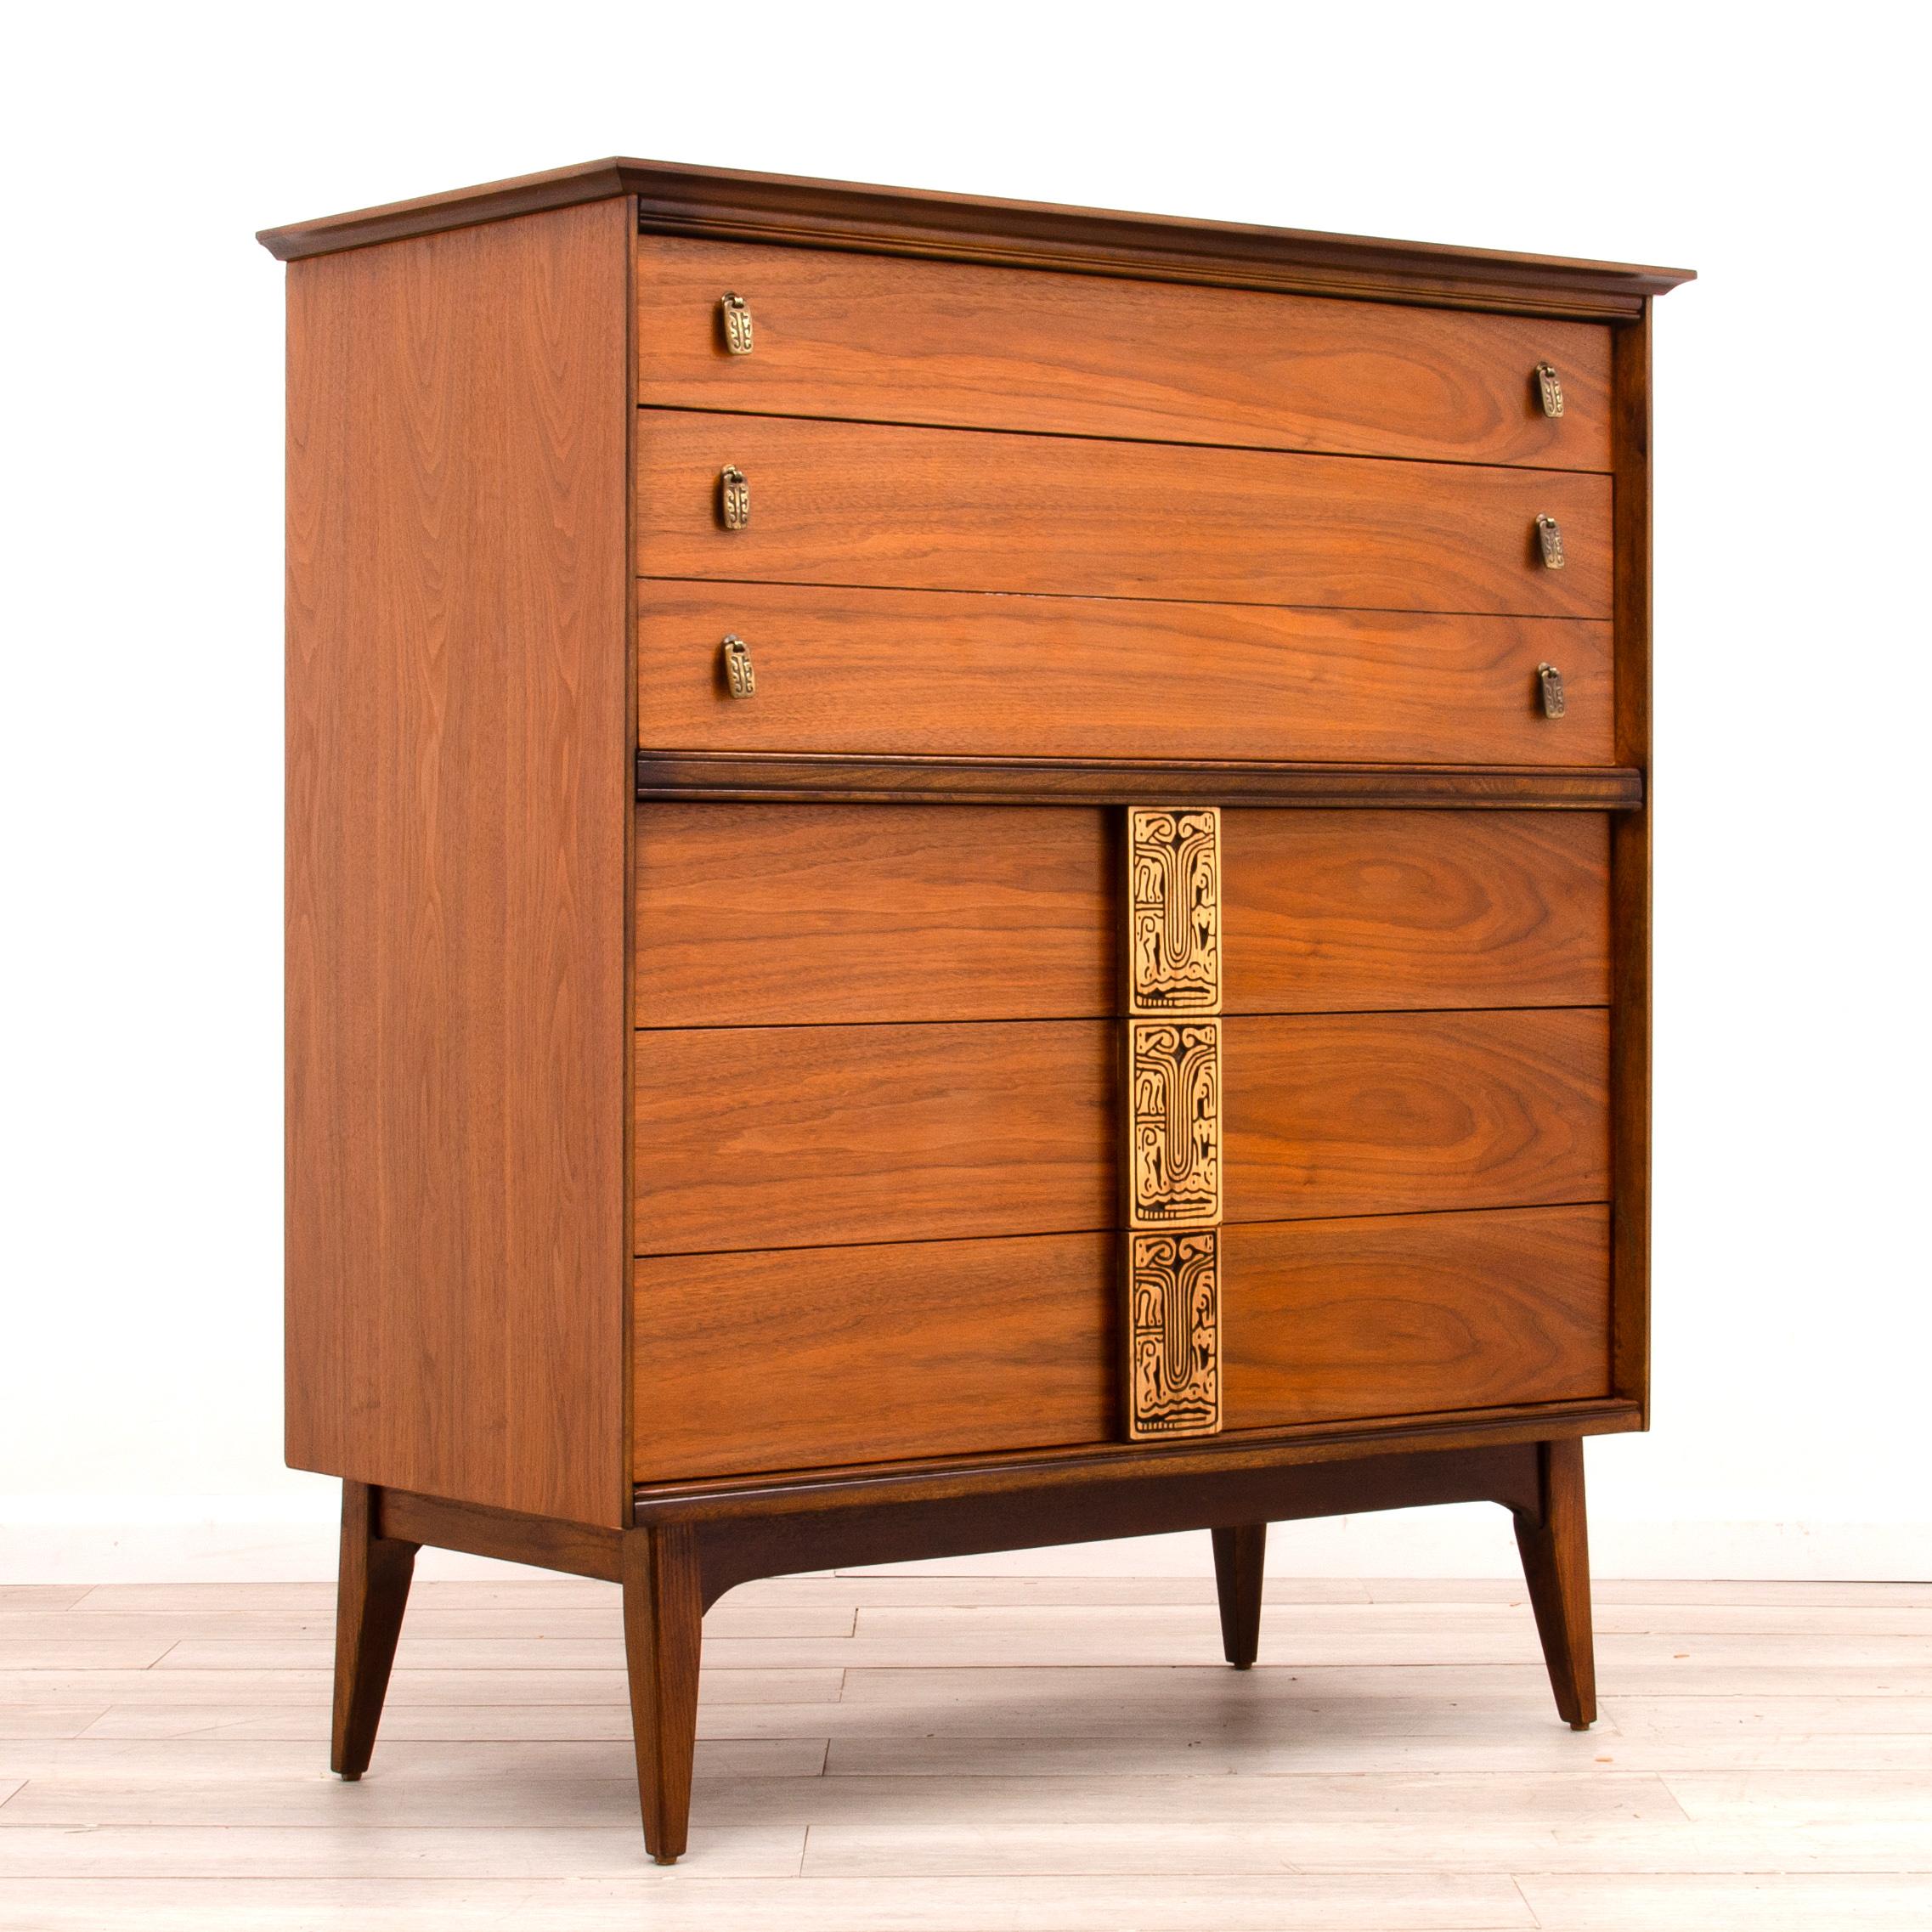 Vintage Mid Century Modern tall highboy dresser from the “Mayan” line by Bassett Furniture Company. The restored case has more depth and clarity to the finish than the original factory finish.
The block carved tiki handles provide a striking